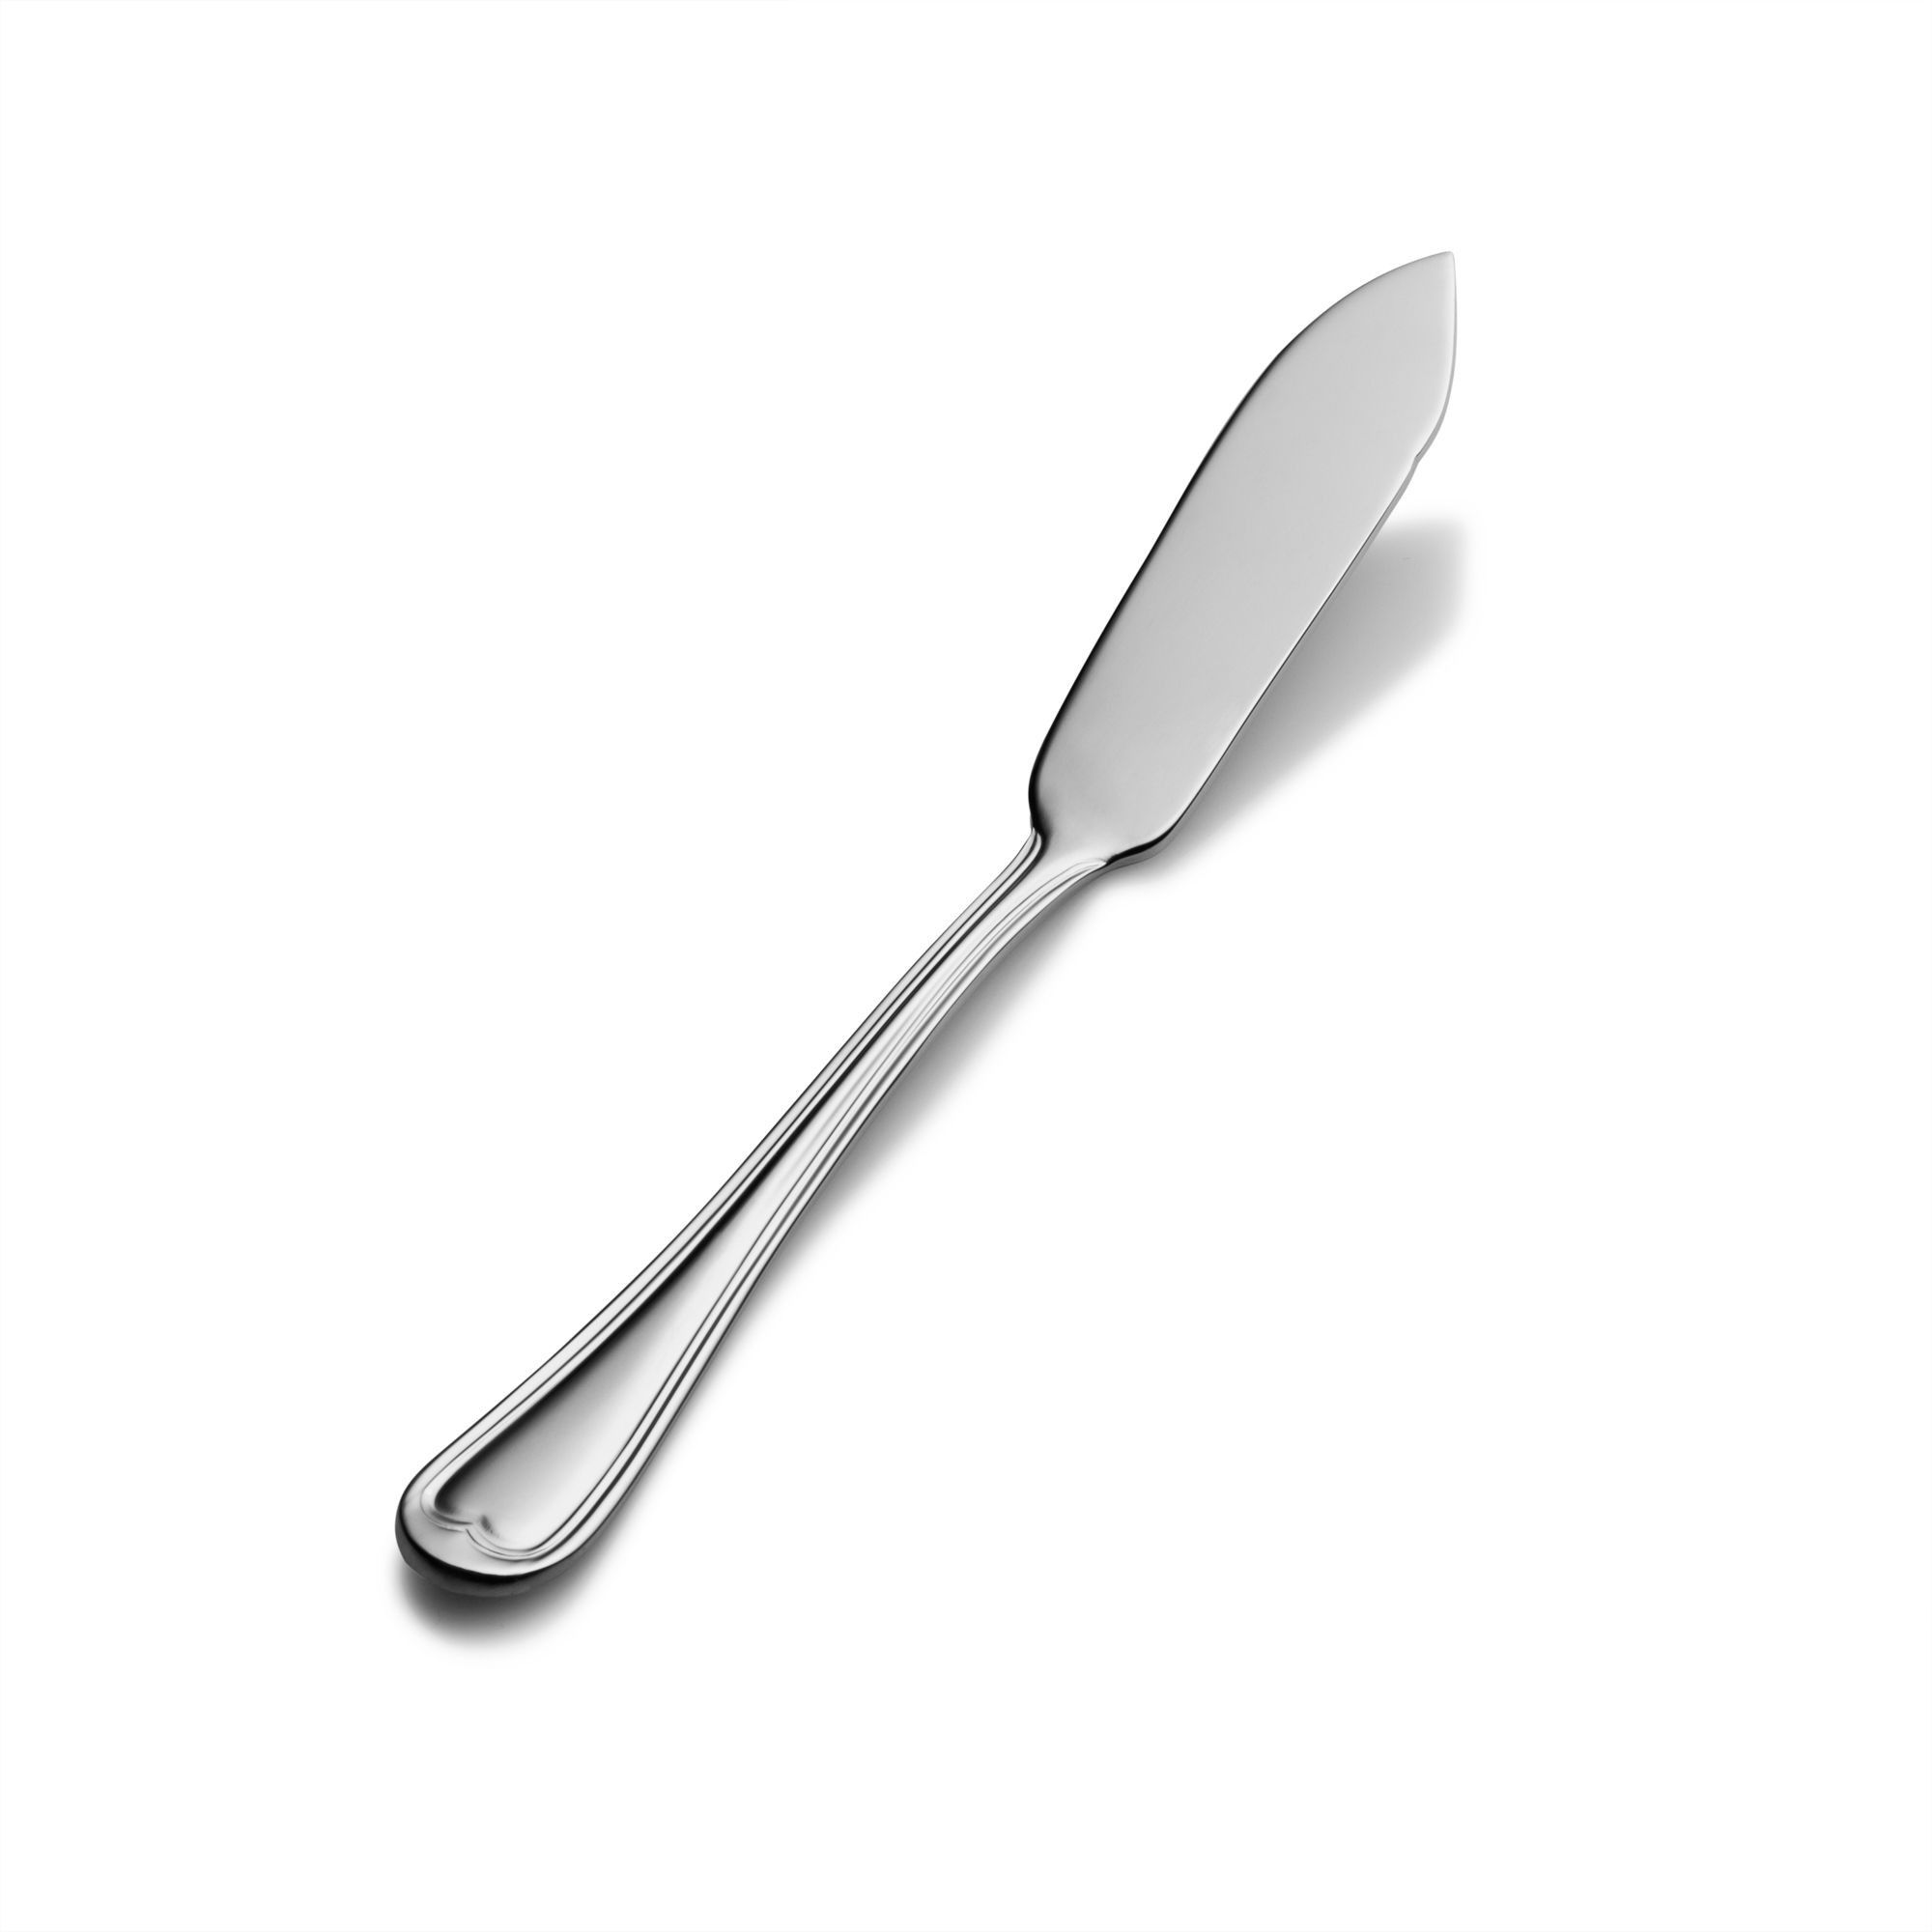 Bon Chef S613 Victoria 18/8 Stainless Steel Flat Handle Butter Spreader